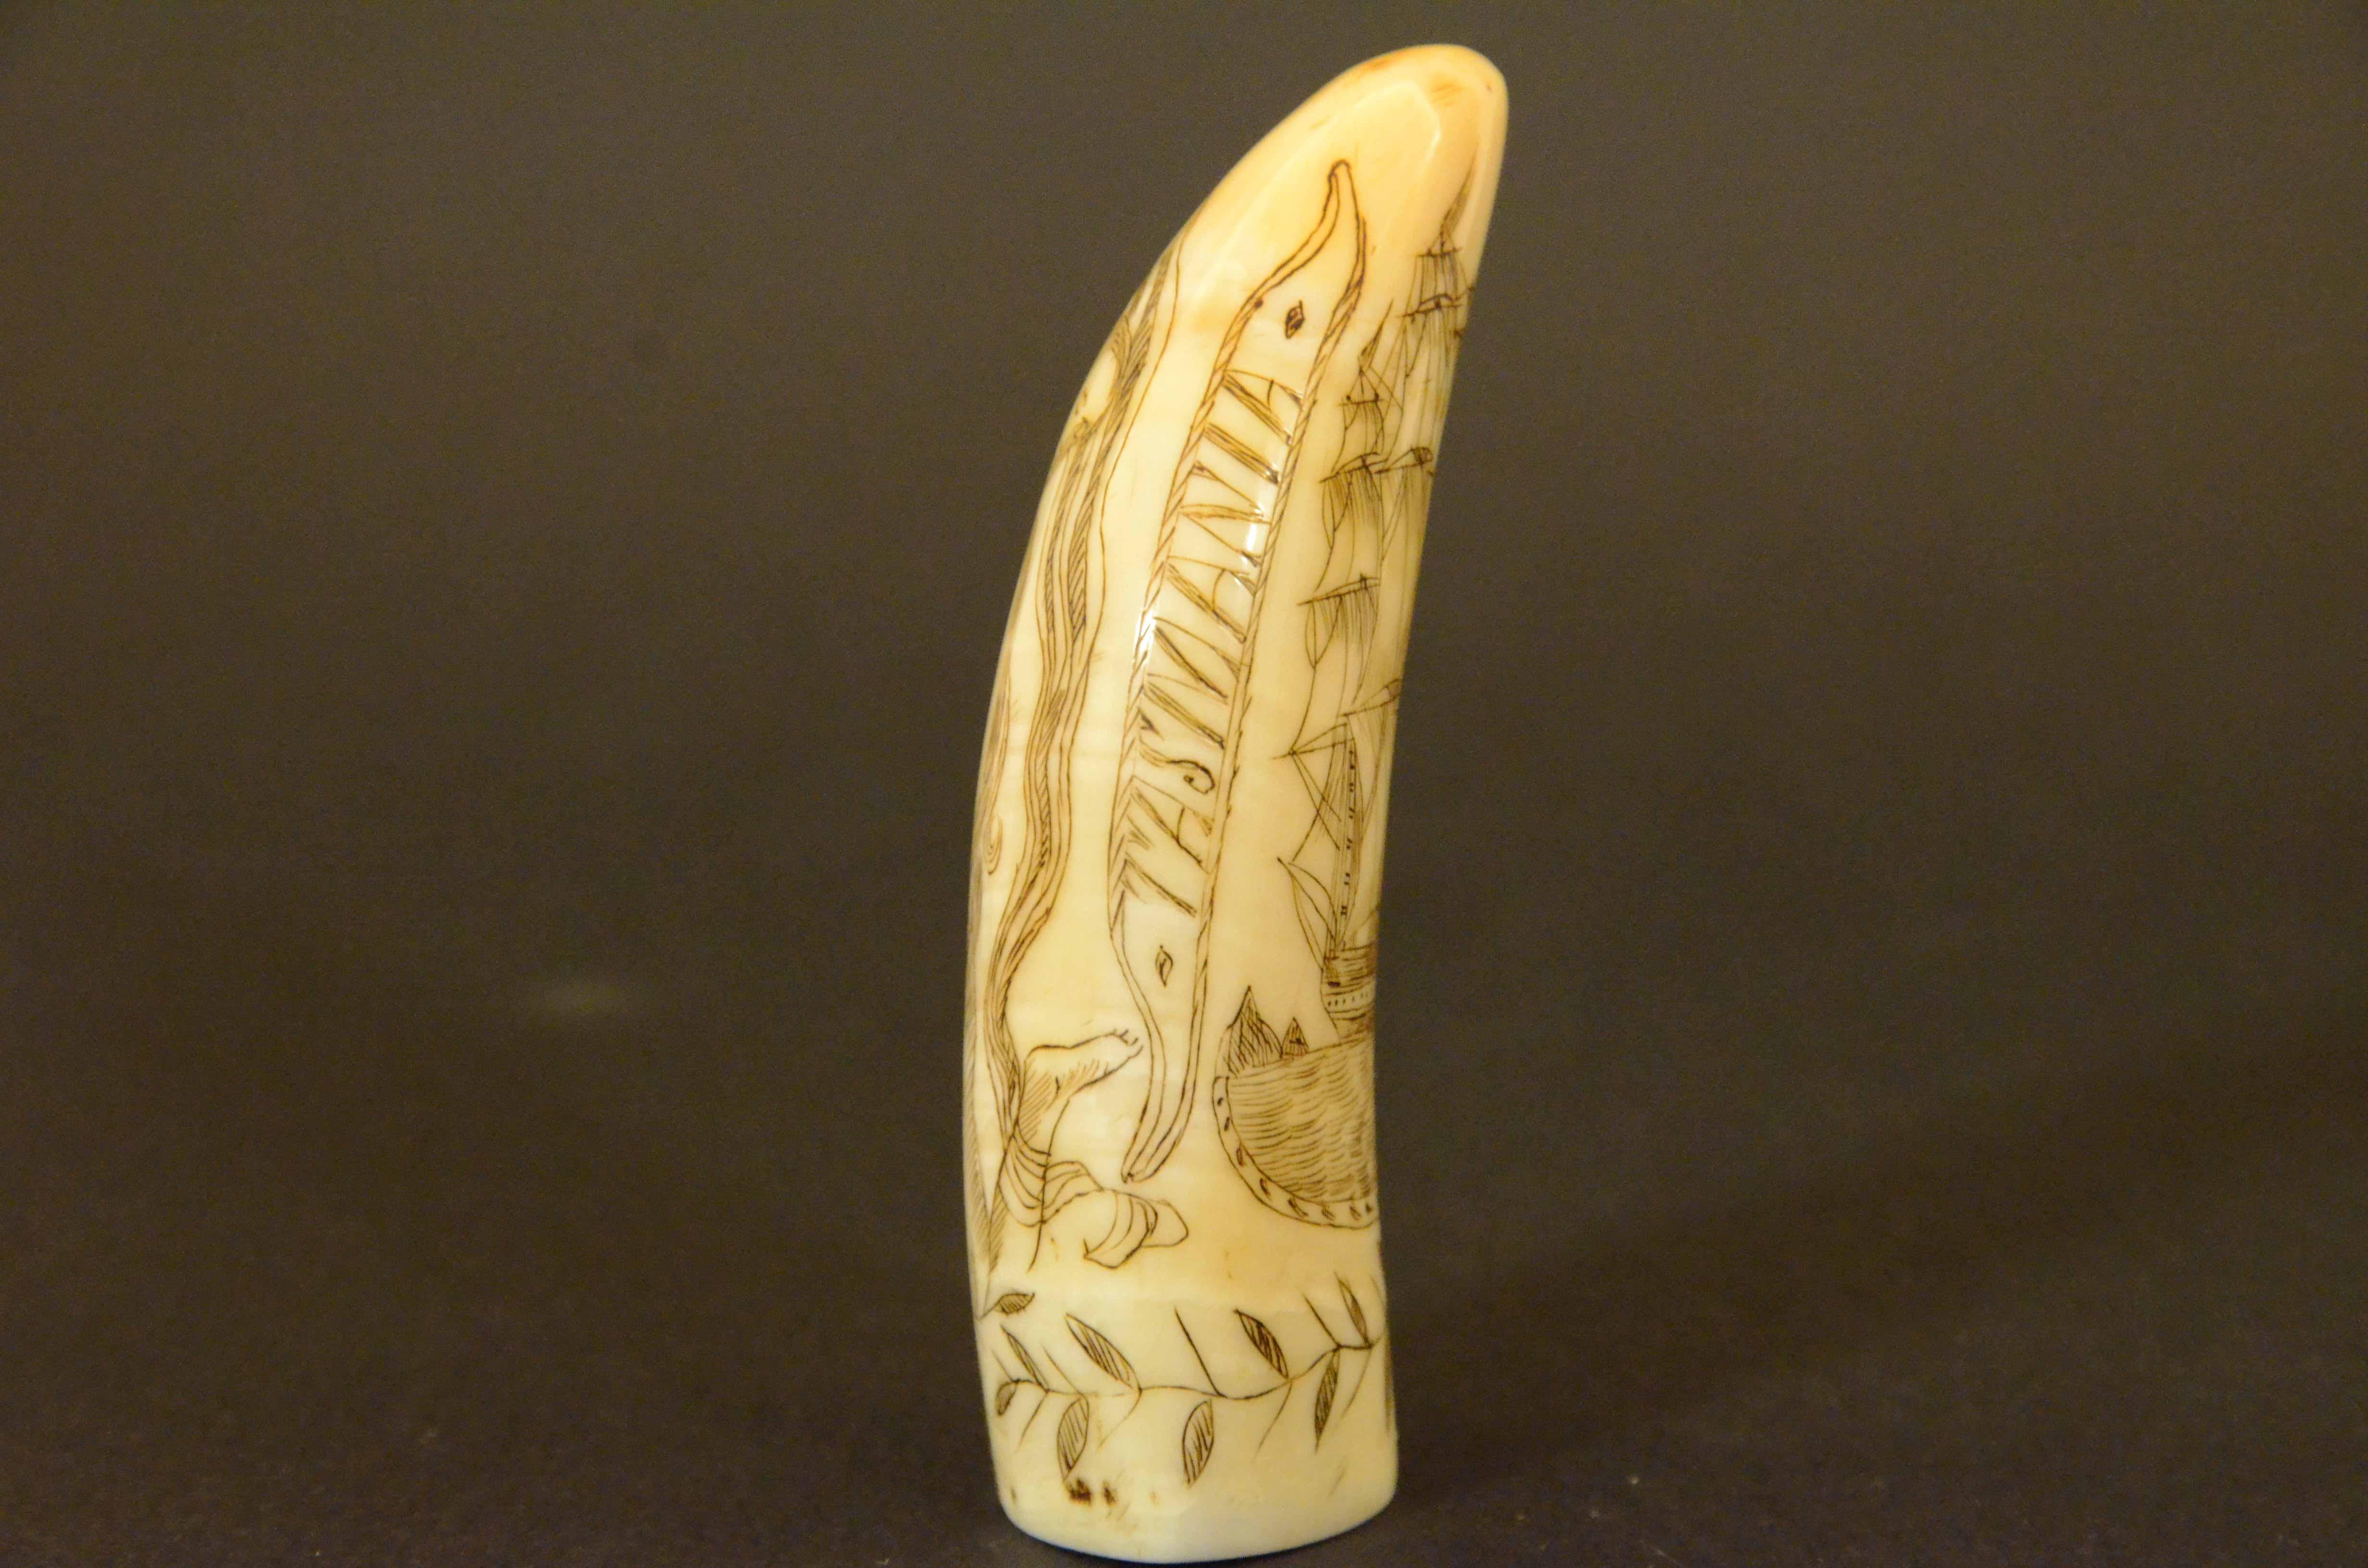 Scrimshaw of engraved whale tooth depicting naked woman with very 1850s face For Sale 5